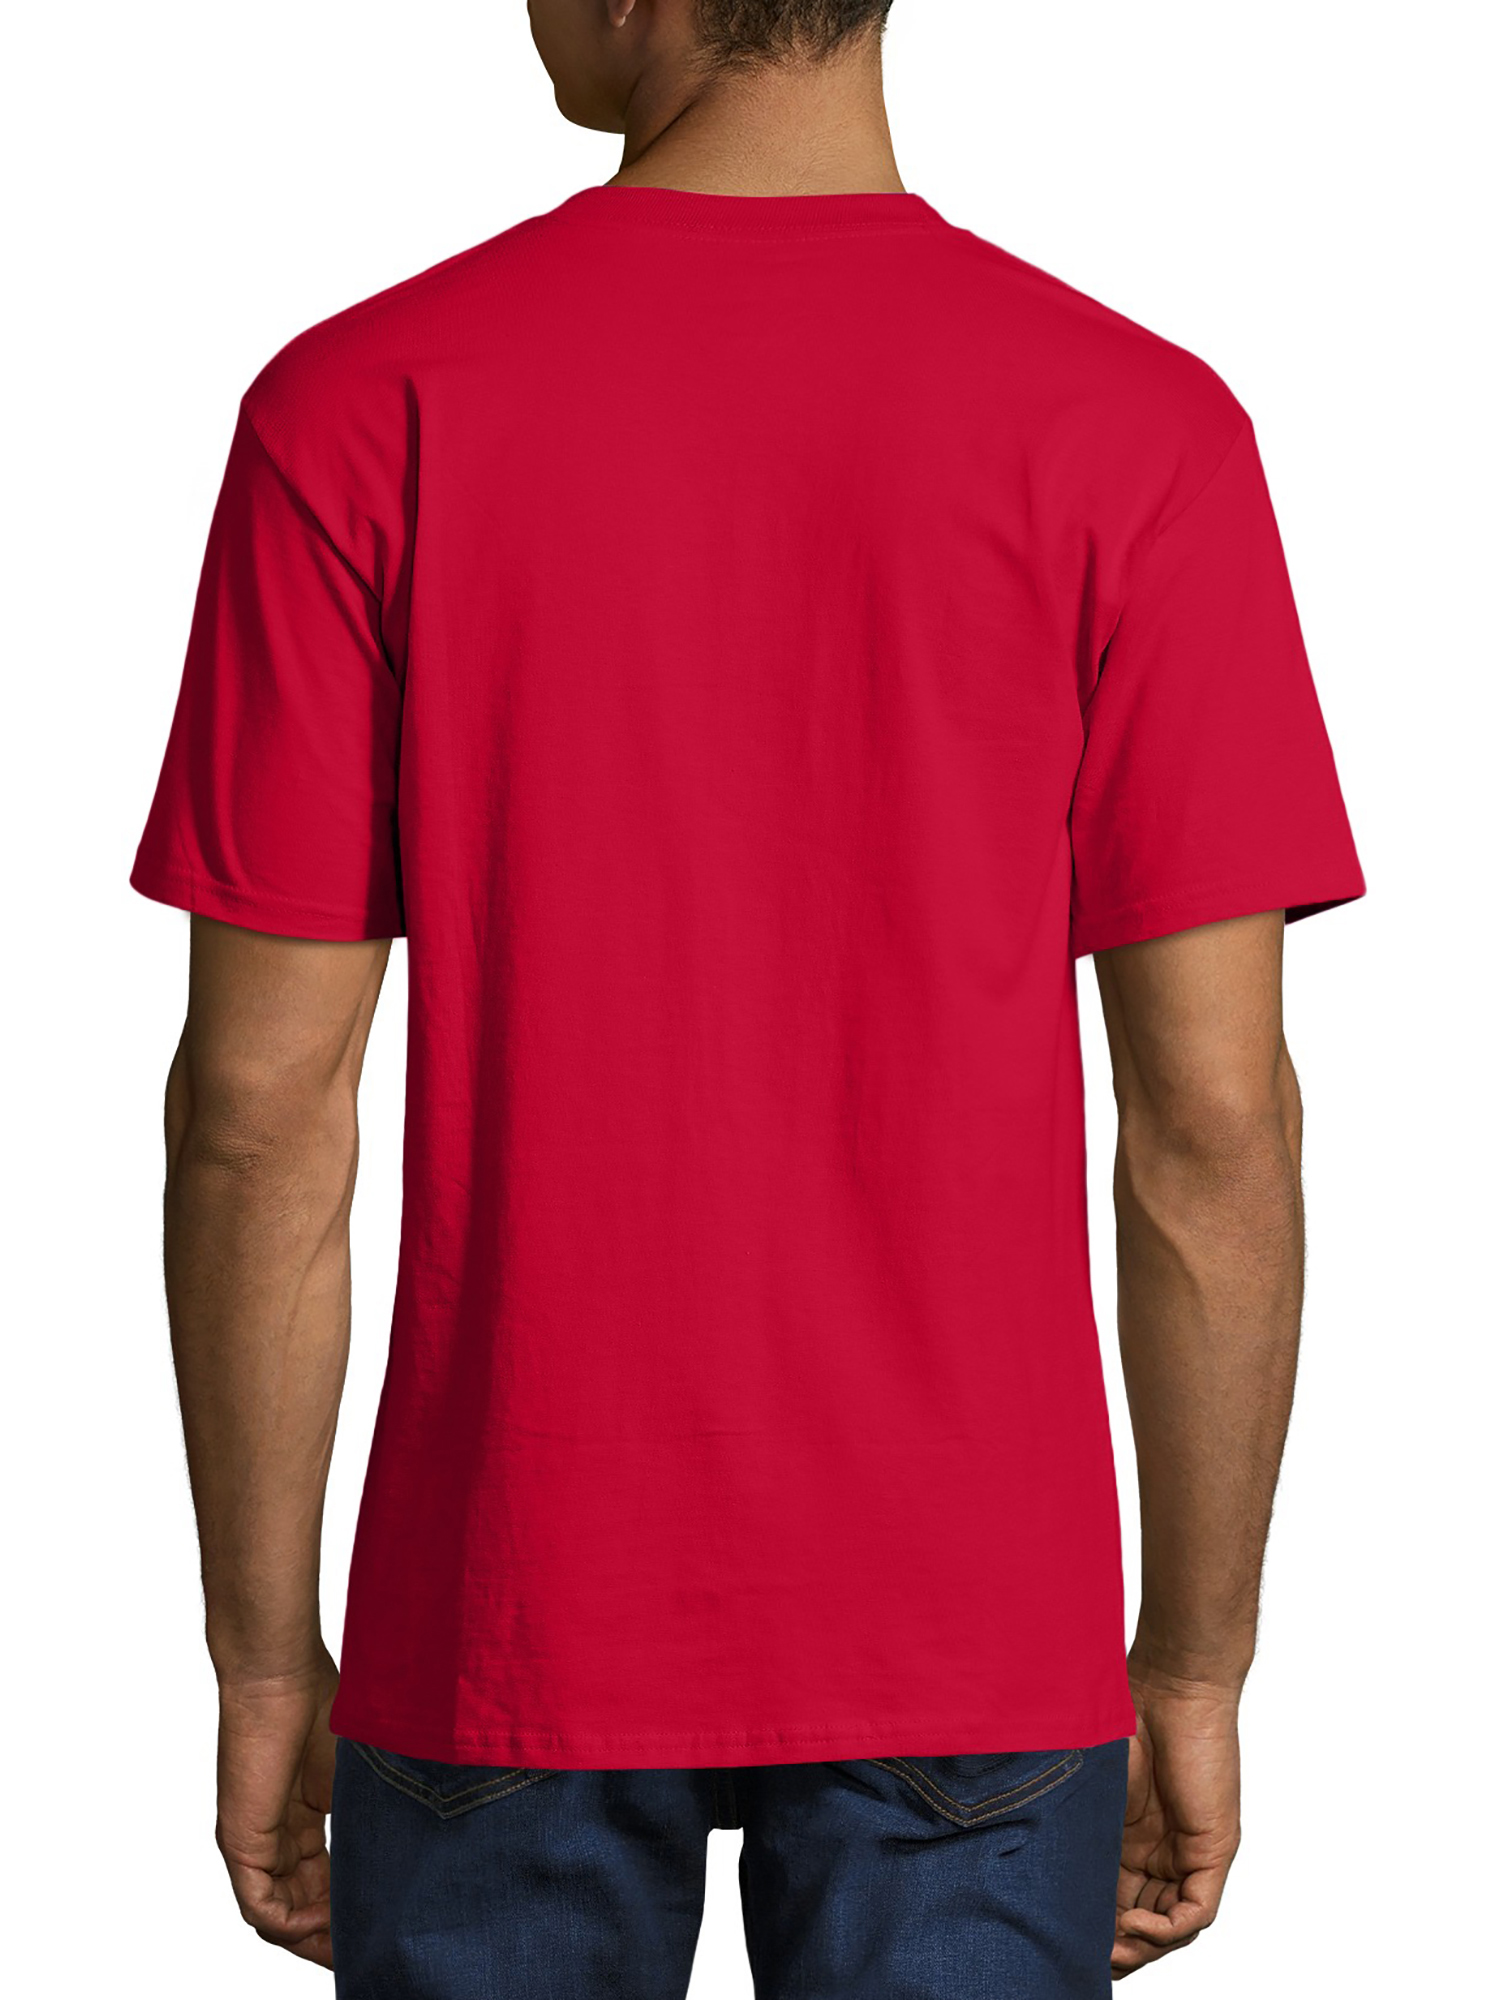 Hanes Big Men's Beefy Heavyweight Short Sleeve T-shirt - Tall Sizes, Up To Size 4XT - image 4 of 7